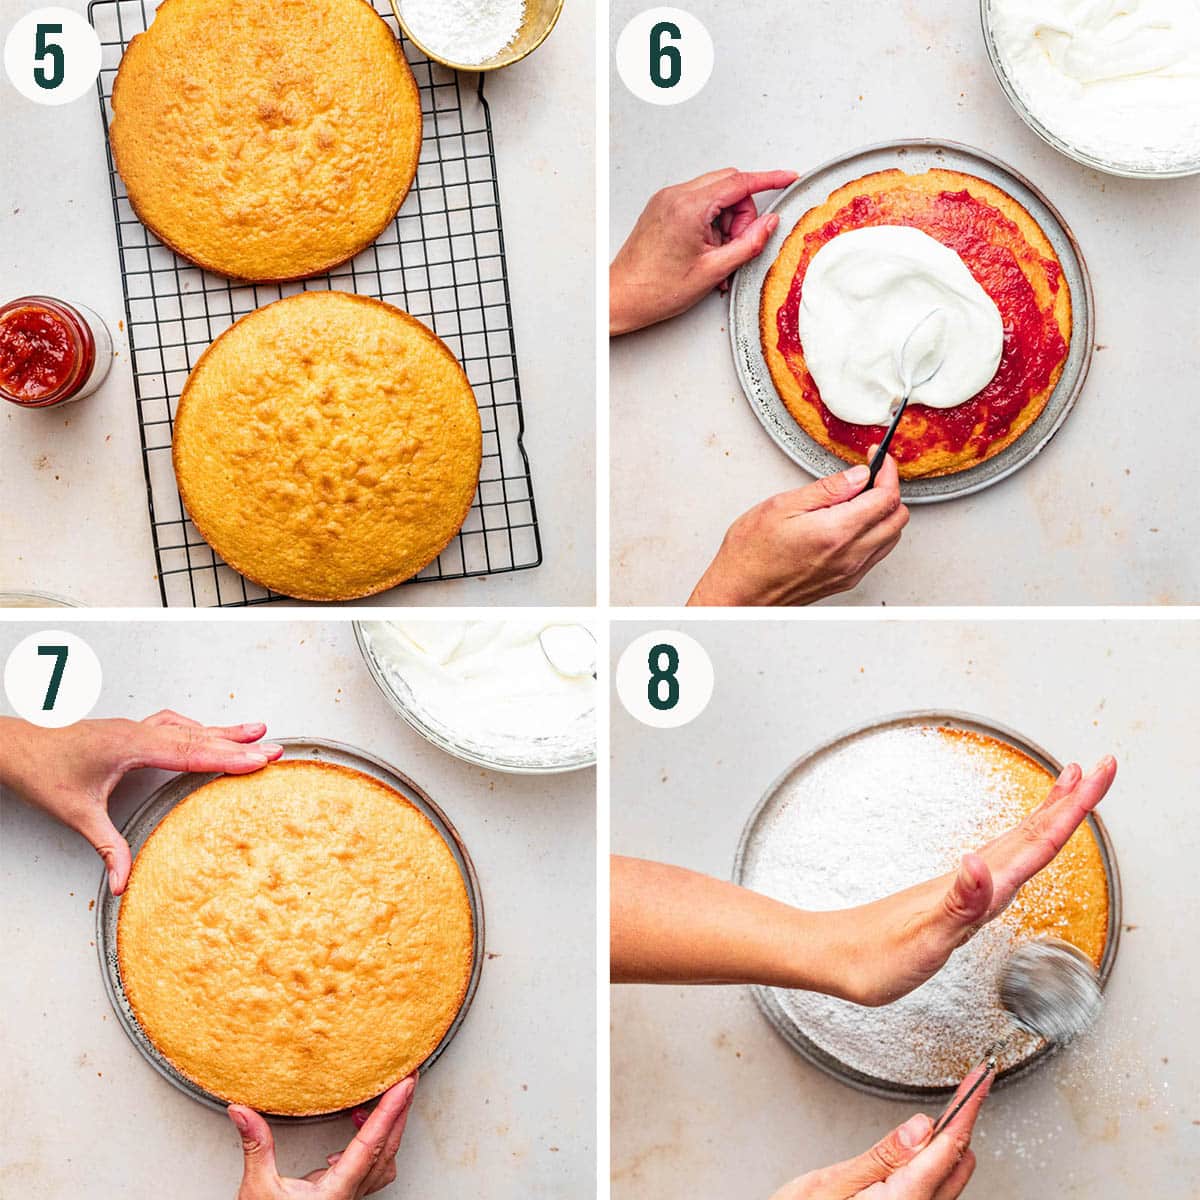 Victoria sponge steps 5 to 8, cooling, filling, and assembling the cake.